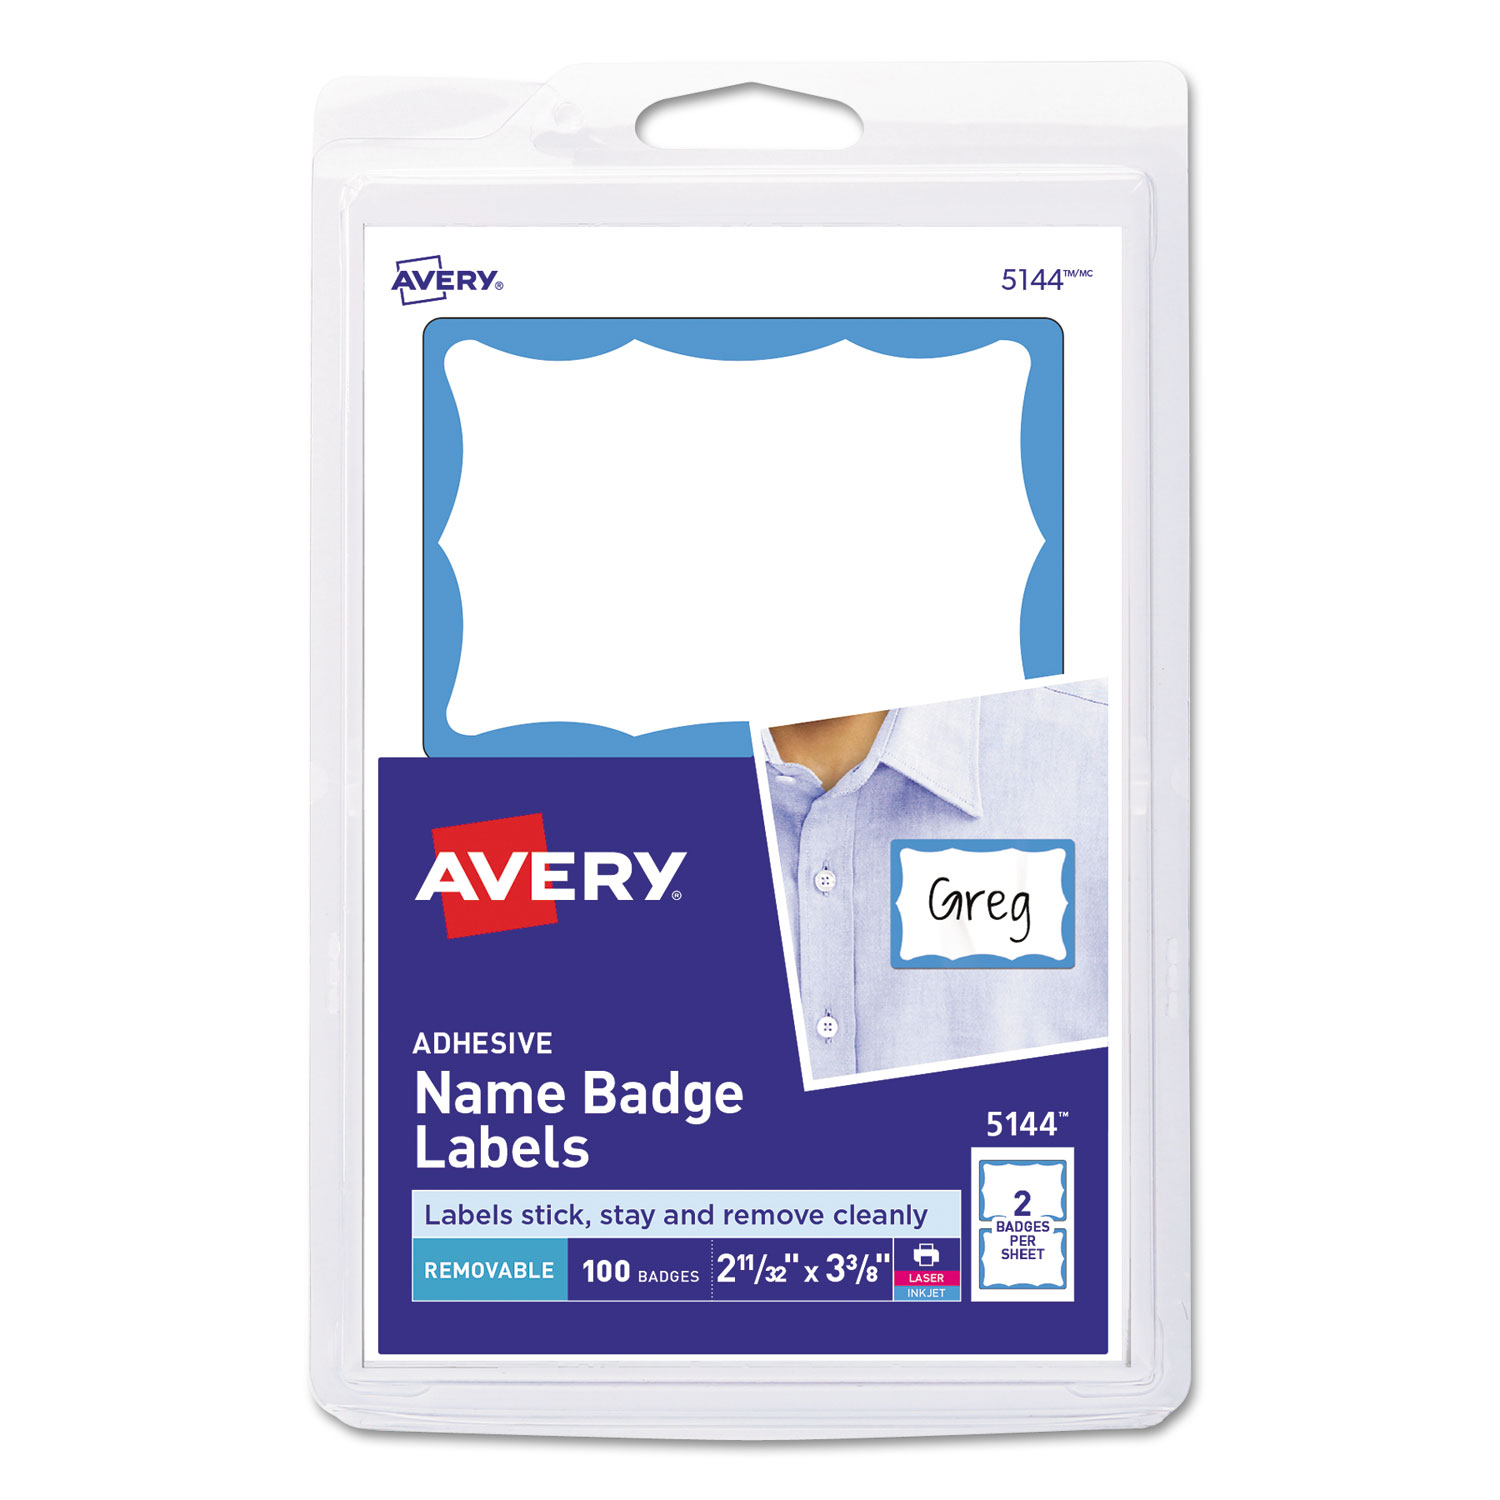  Avery 05144 Printable Adhesive Name Badges, 3.38 x 2.33, Blue Border, 100/Pack (AVE5144) 